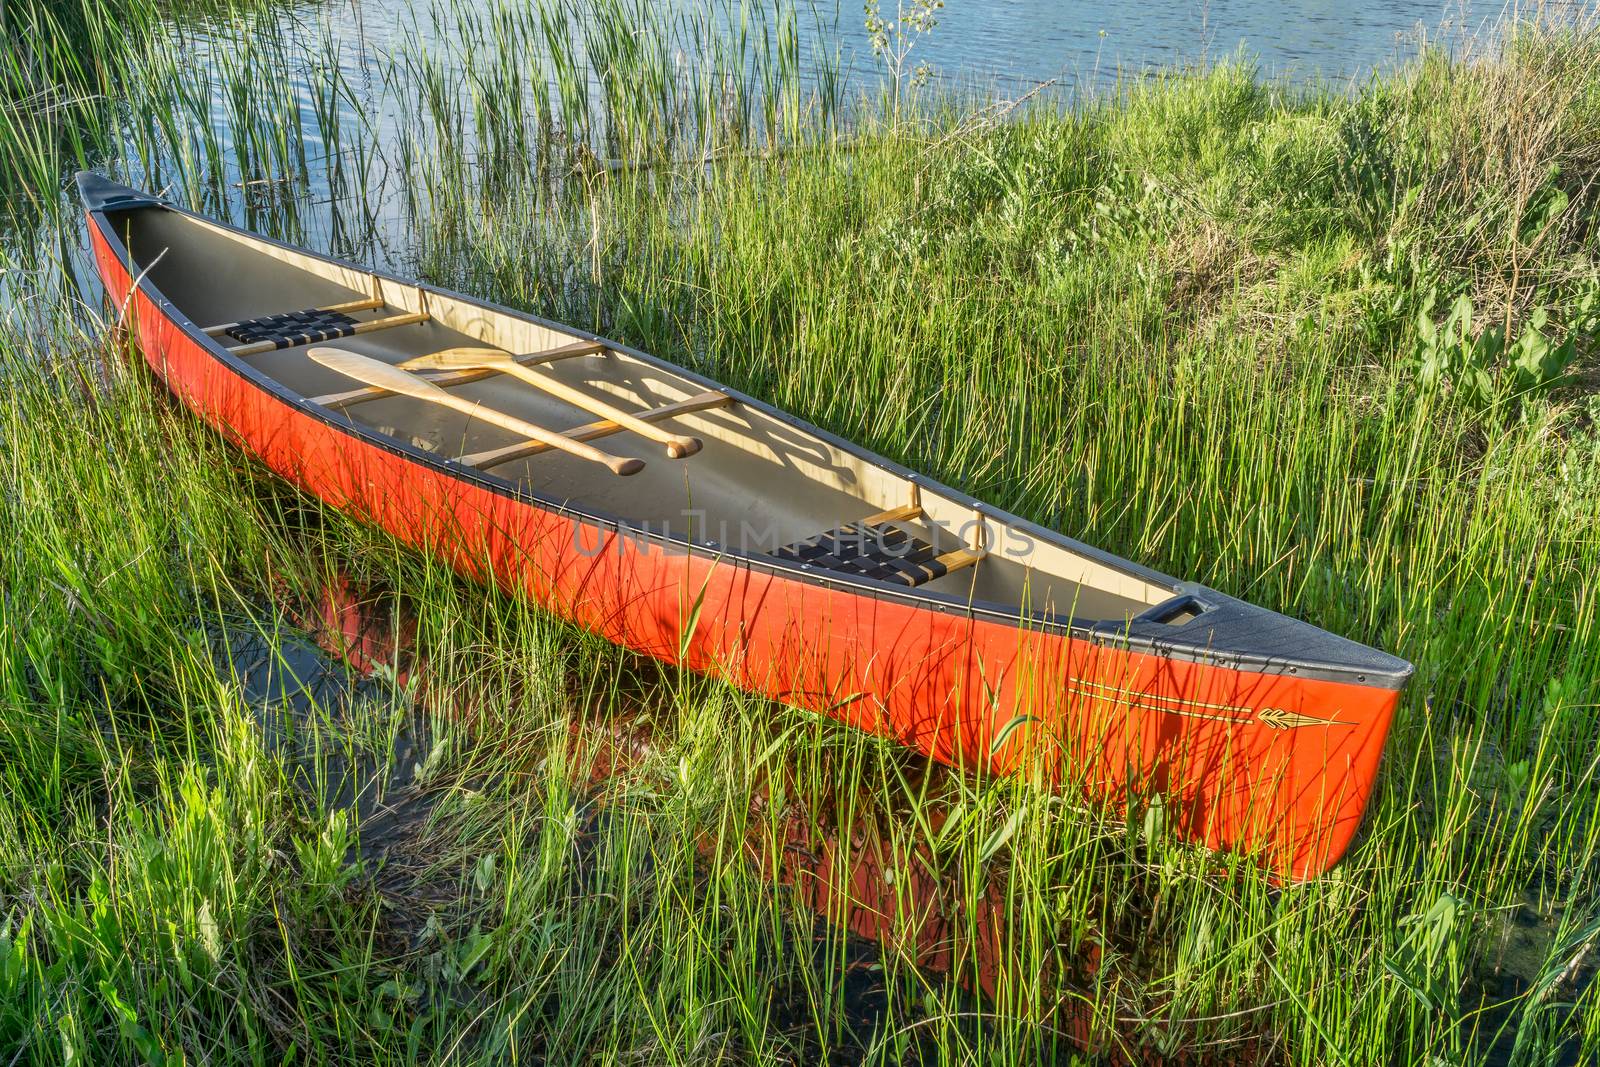 red canoe with wooden paddles on a grassy lake shore